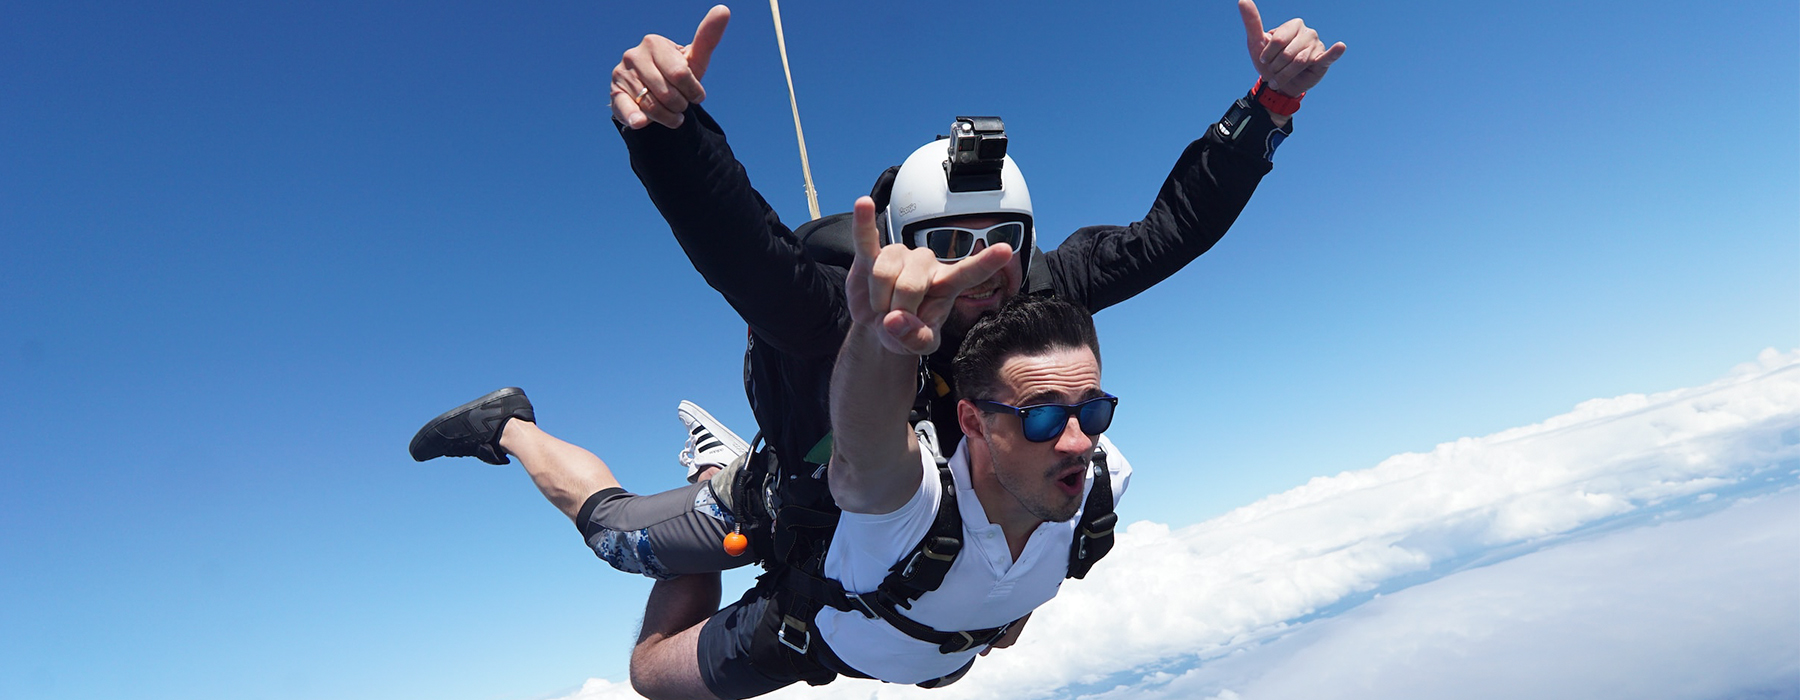 Two people tandem skydiving and posing through the air